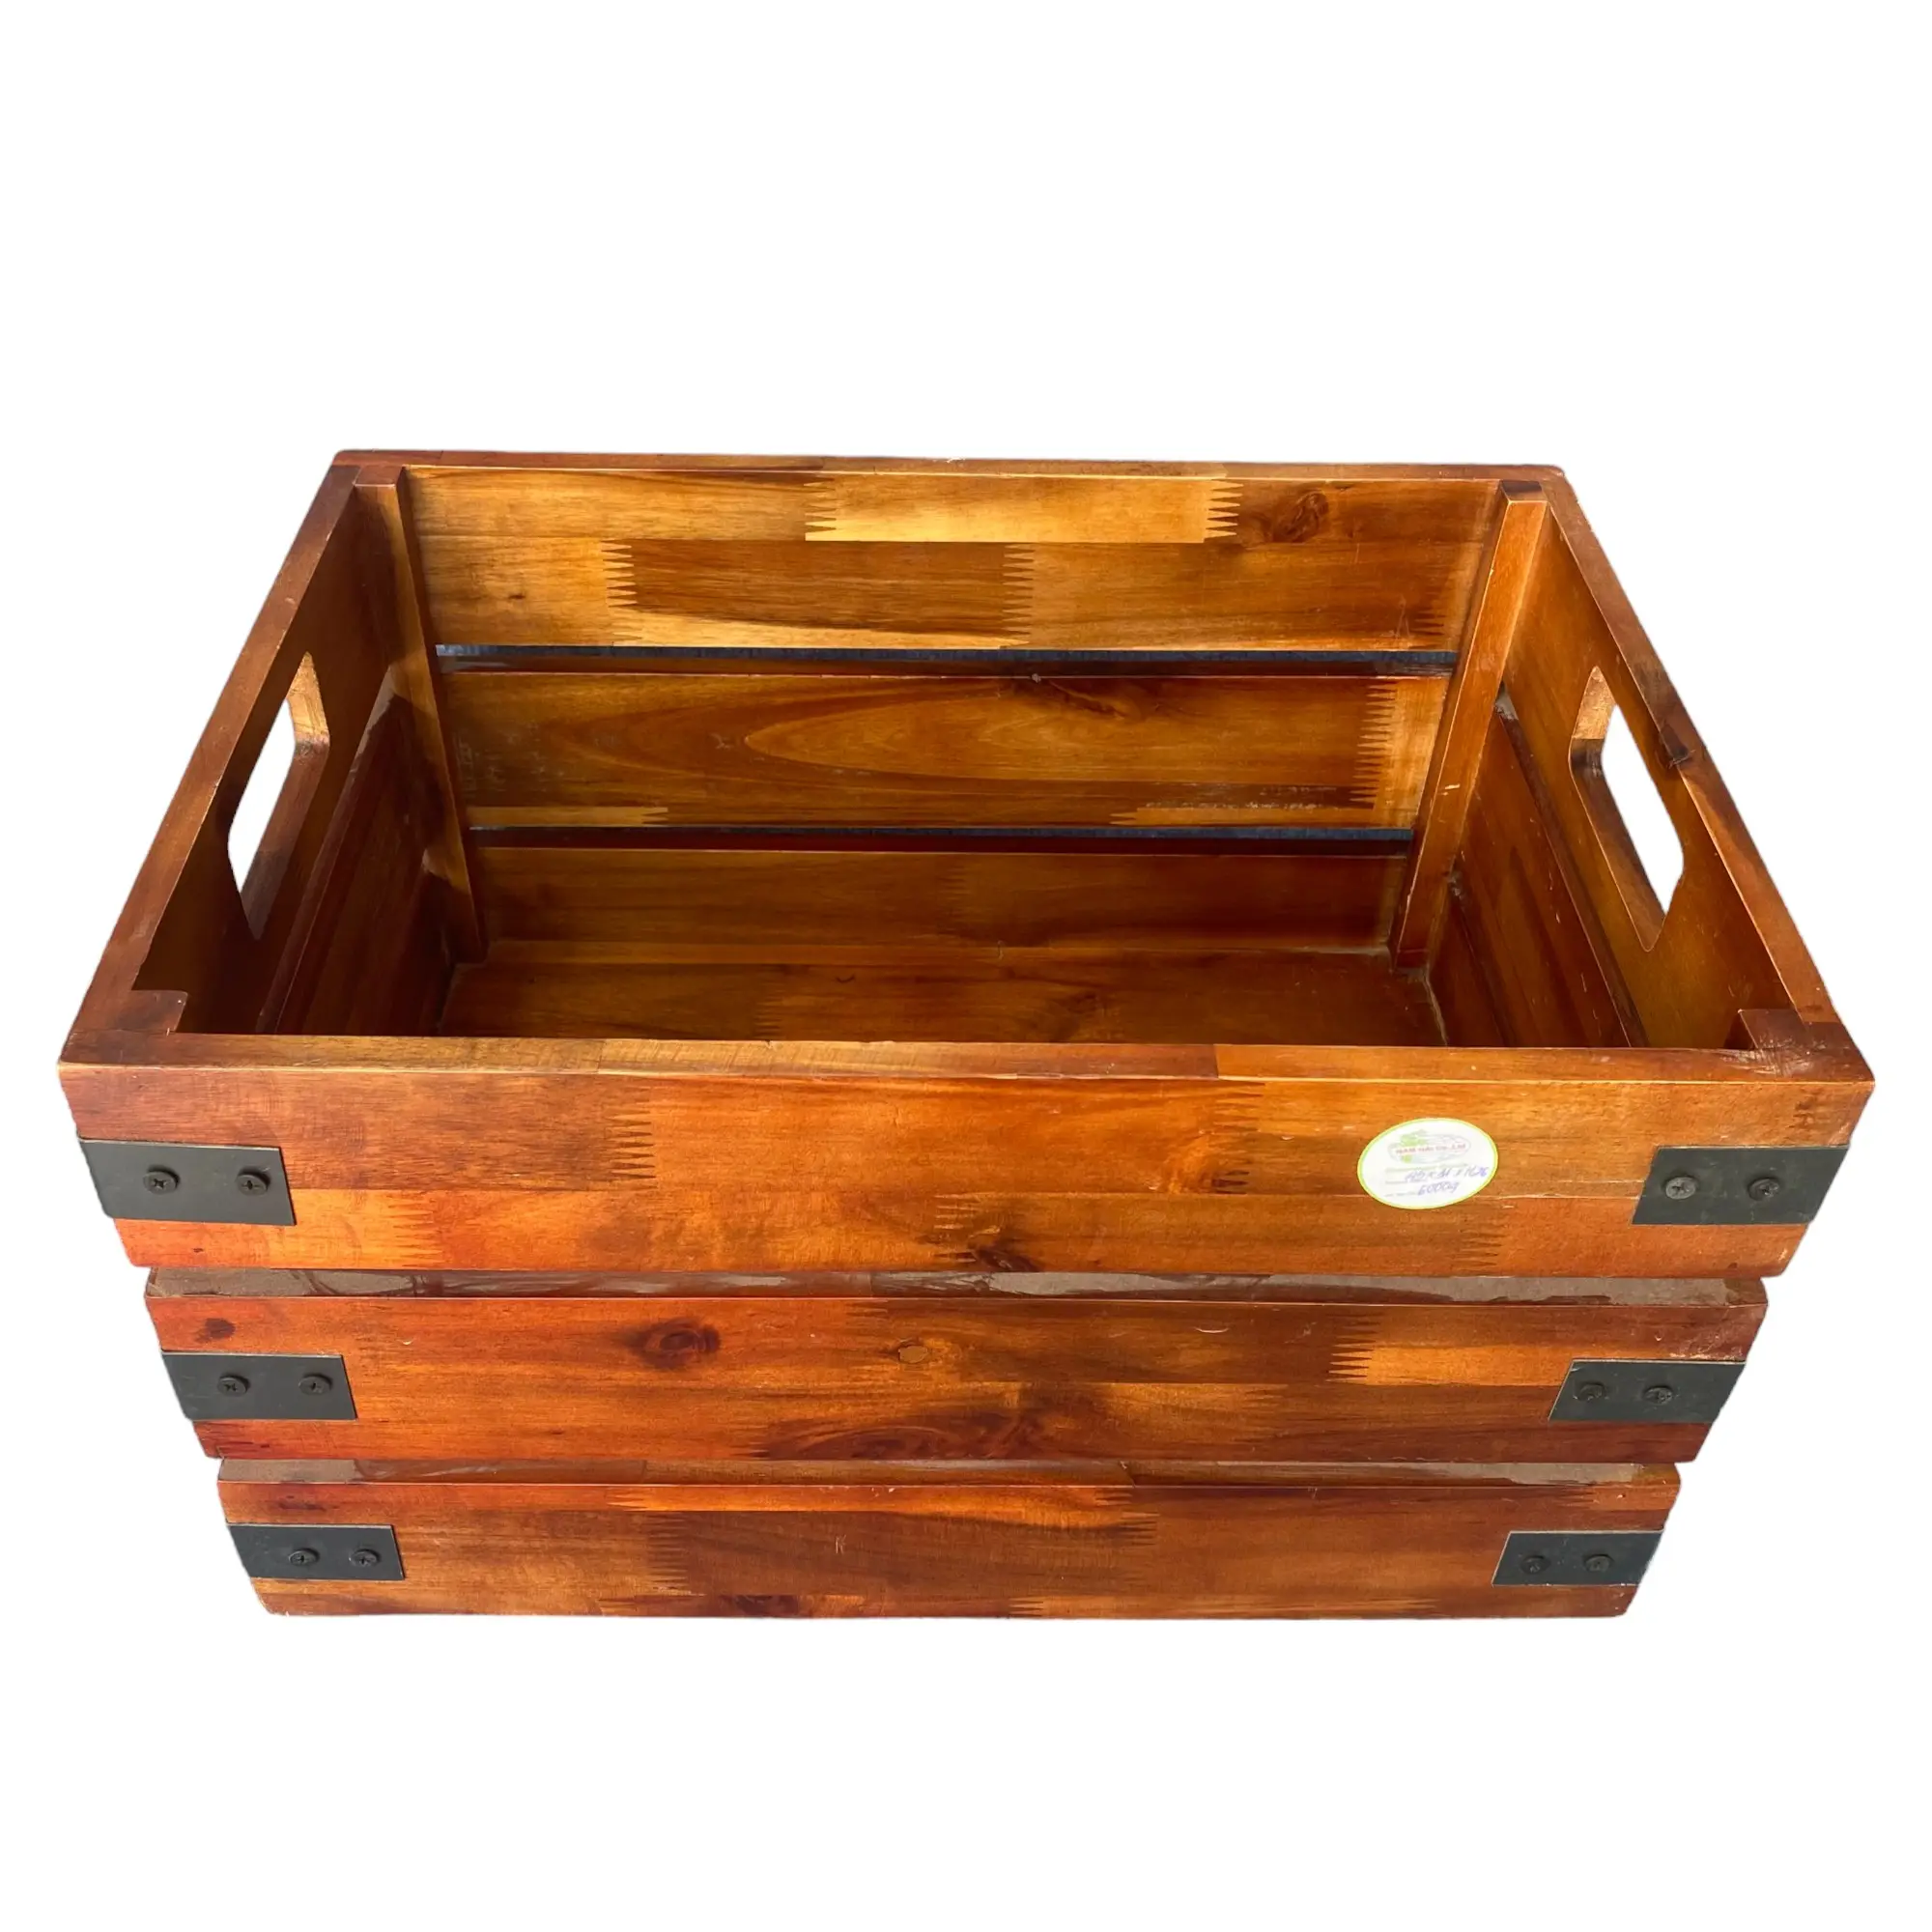 Wholesale Cheap Vintage Handmade Wooden Fruit And Vegetable Storage Boxes For Home Decoration From Vietnam Manufacturer